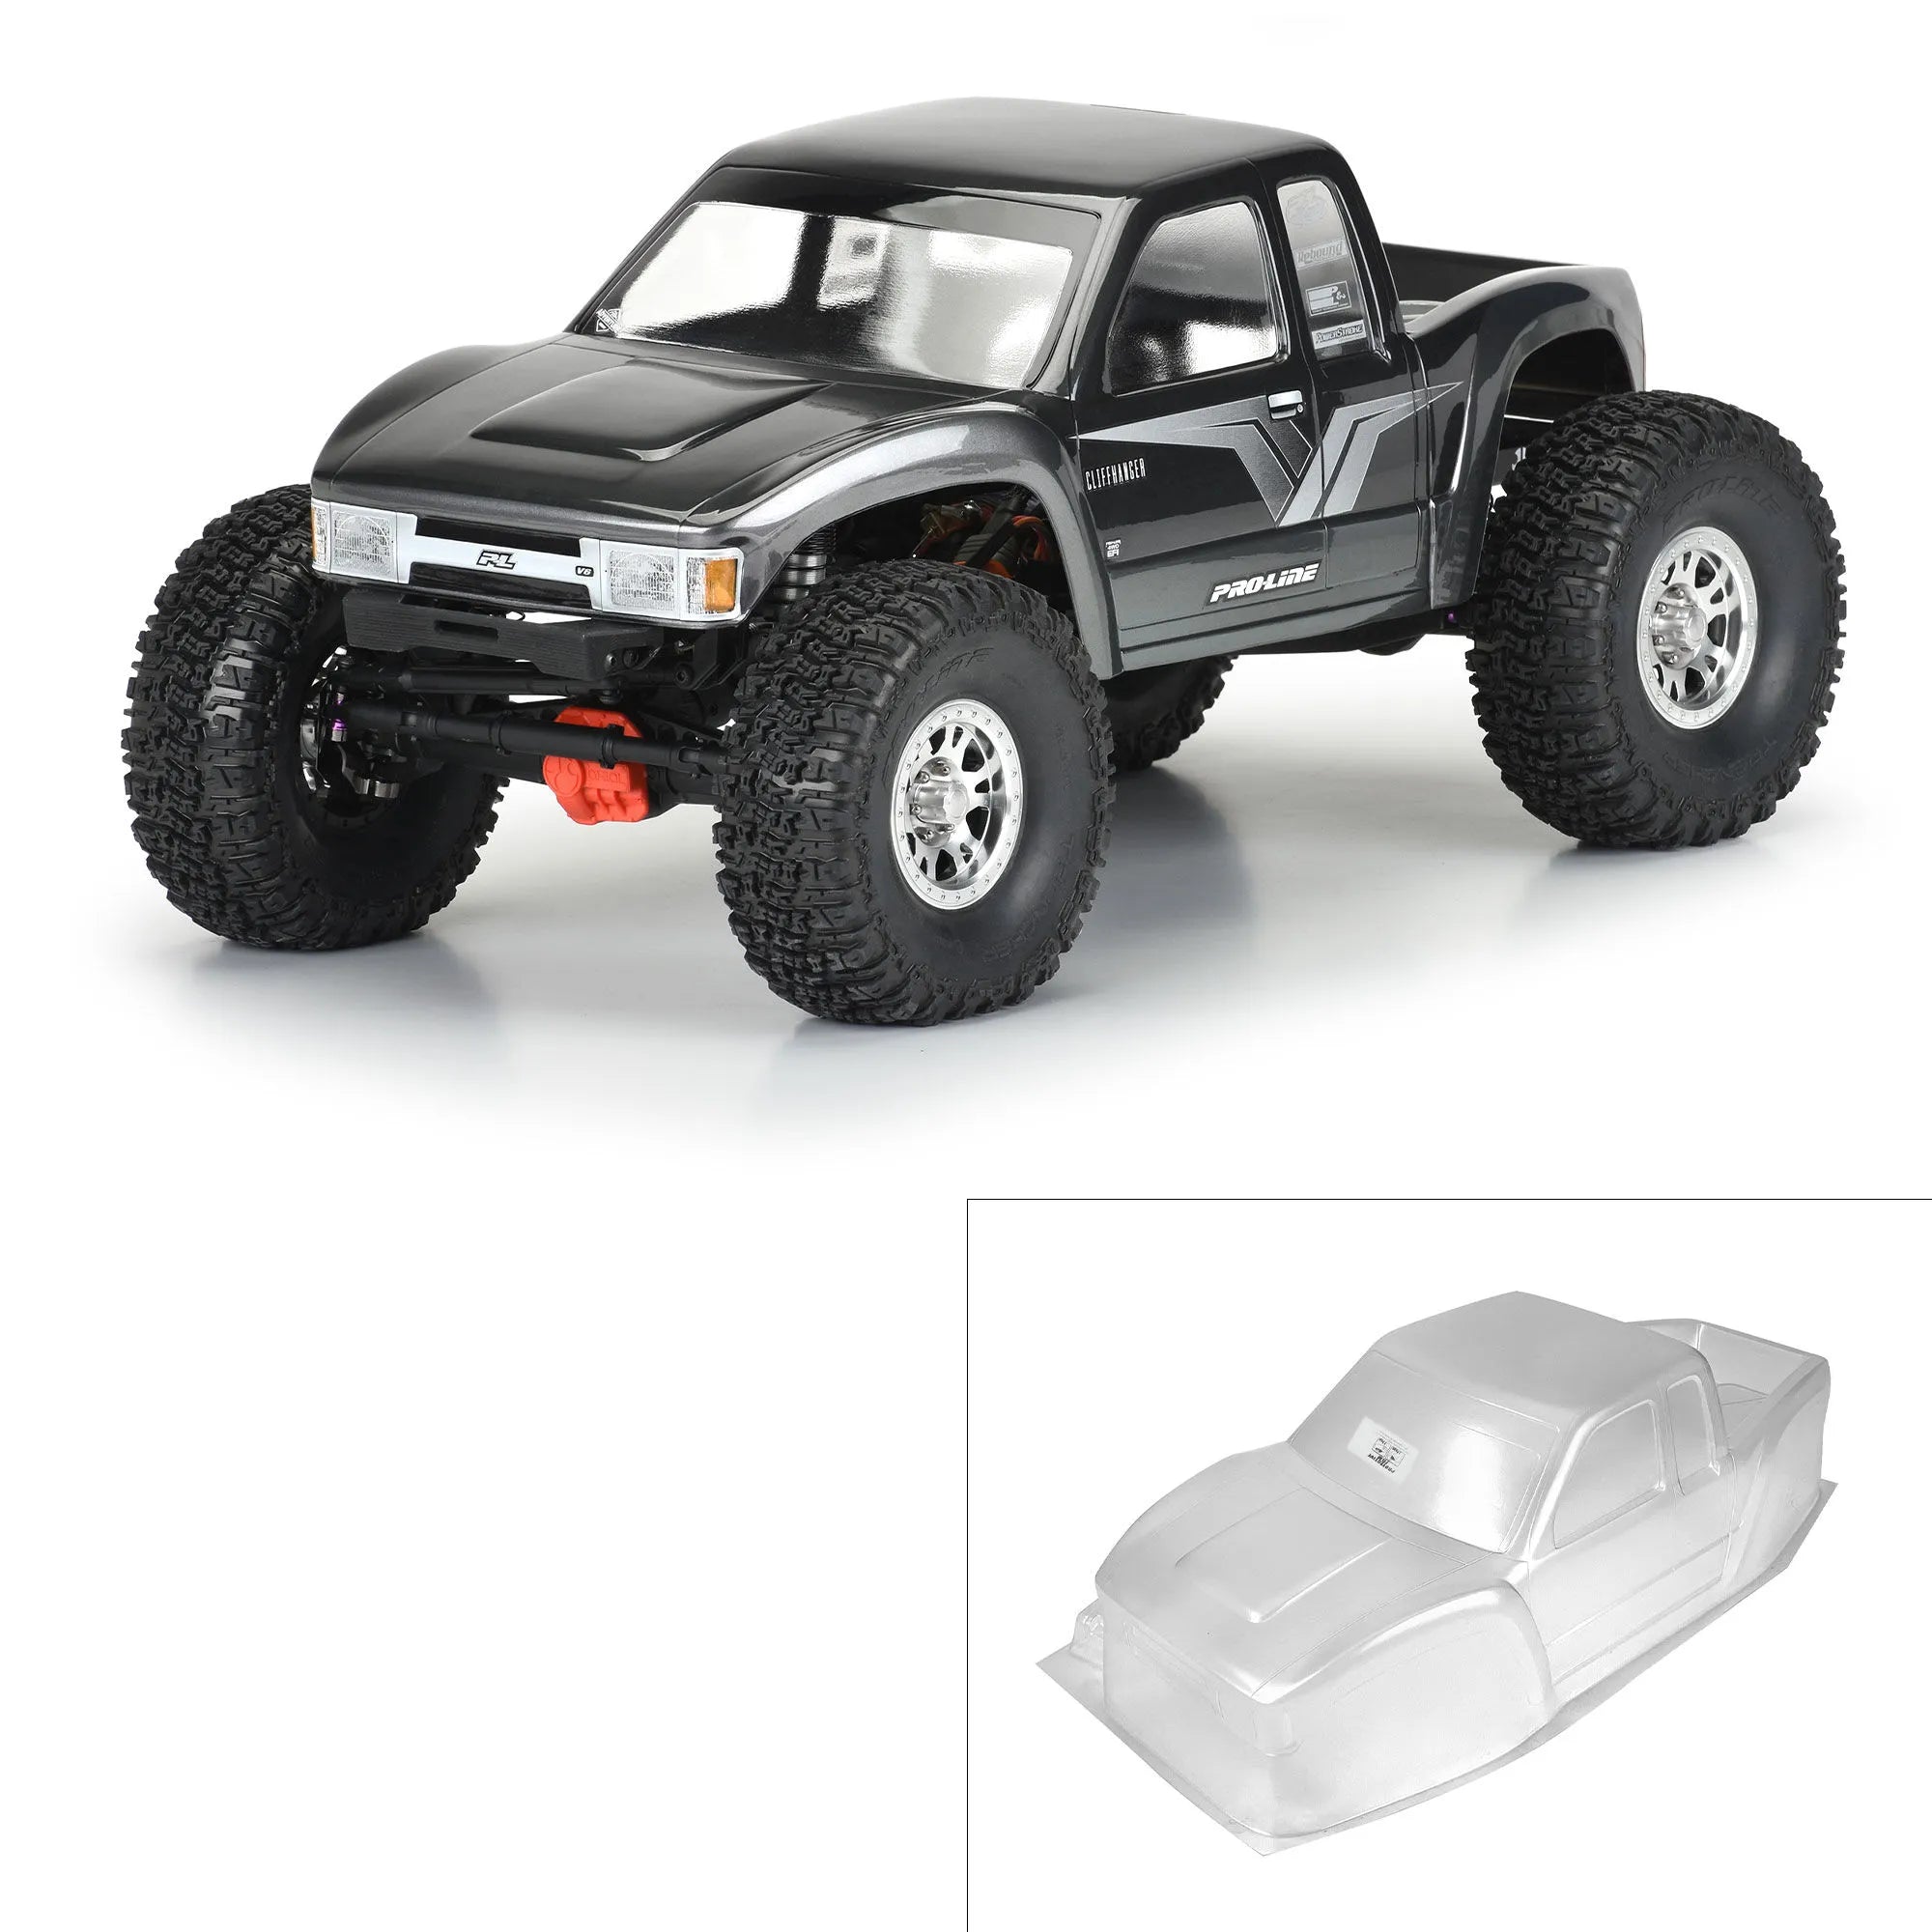 Proline Cliffhanger HP Clear Body for 12.3in WB Crawlers, PR3566-00 - [Sunshine-Coast] - Proline Racing - [RC-Car] - [Scale-Model]